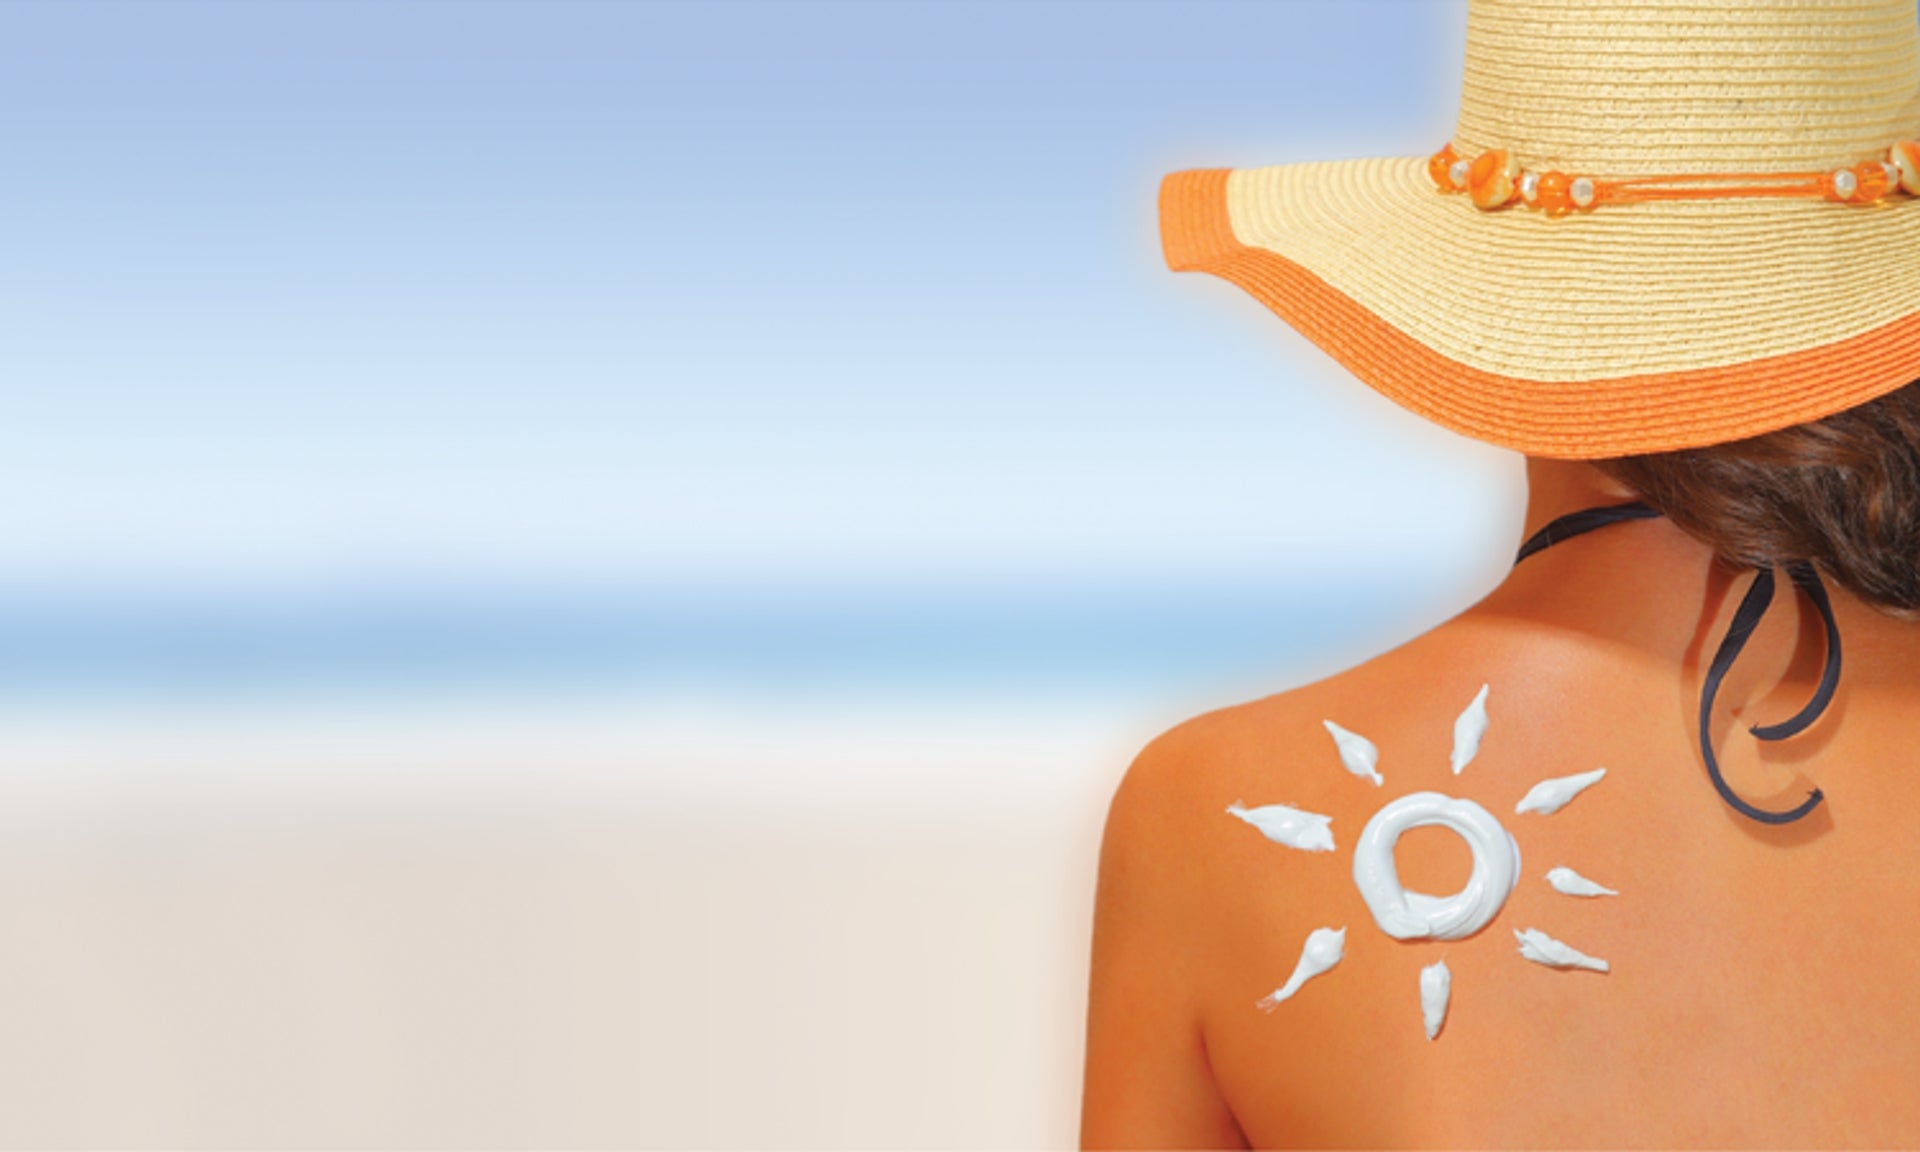 How To Choose A Safe Sunscreen